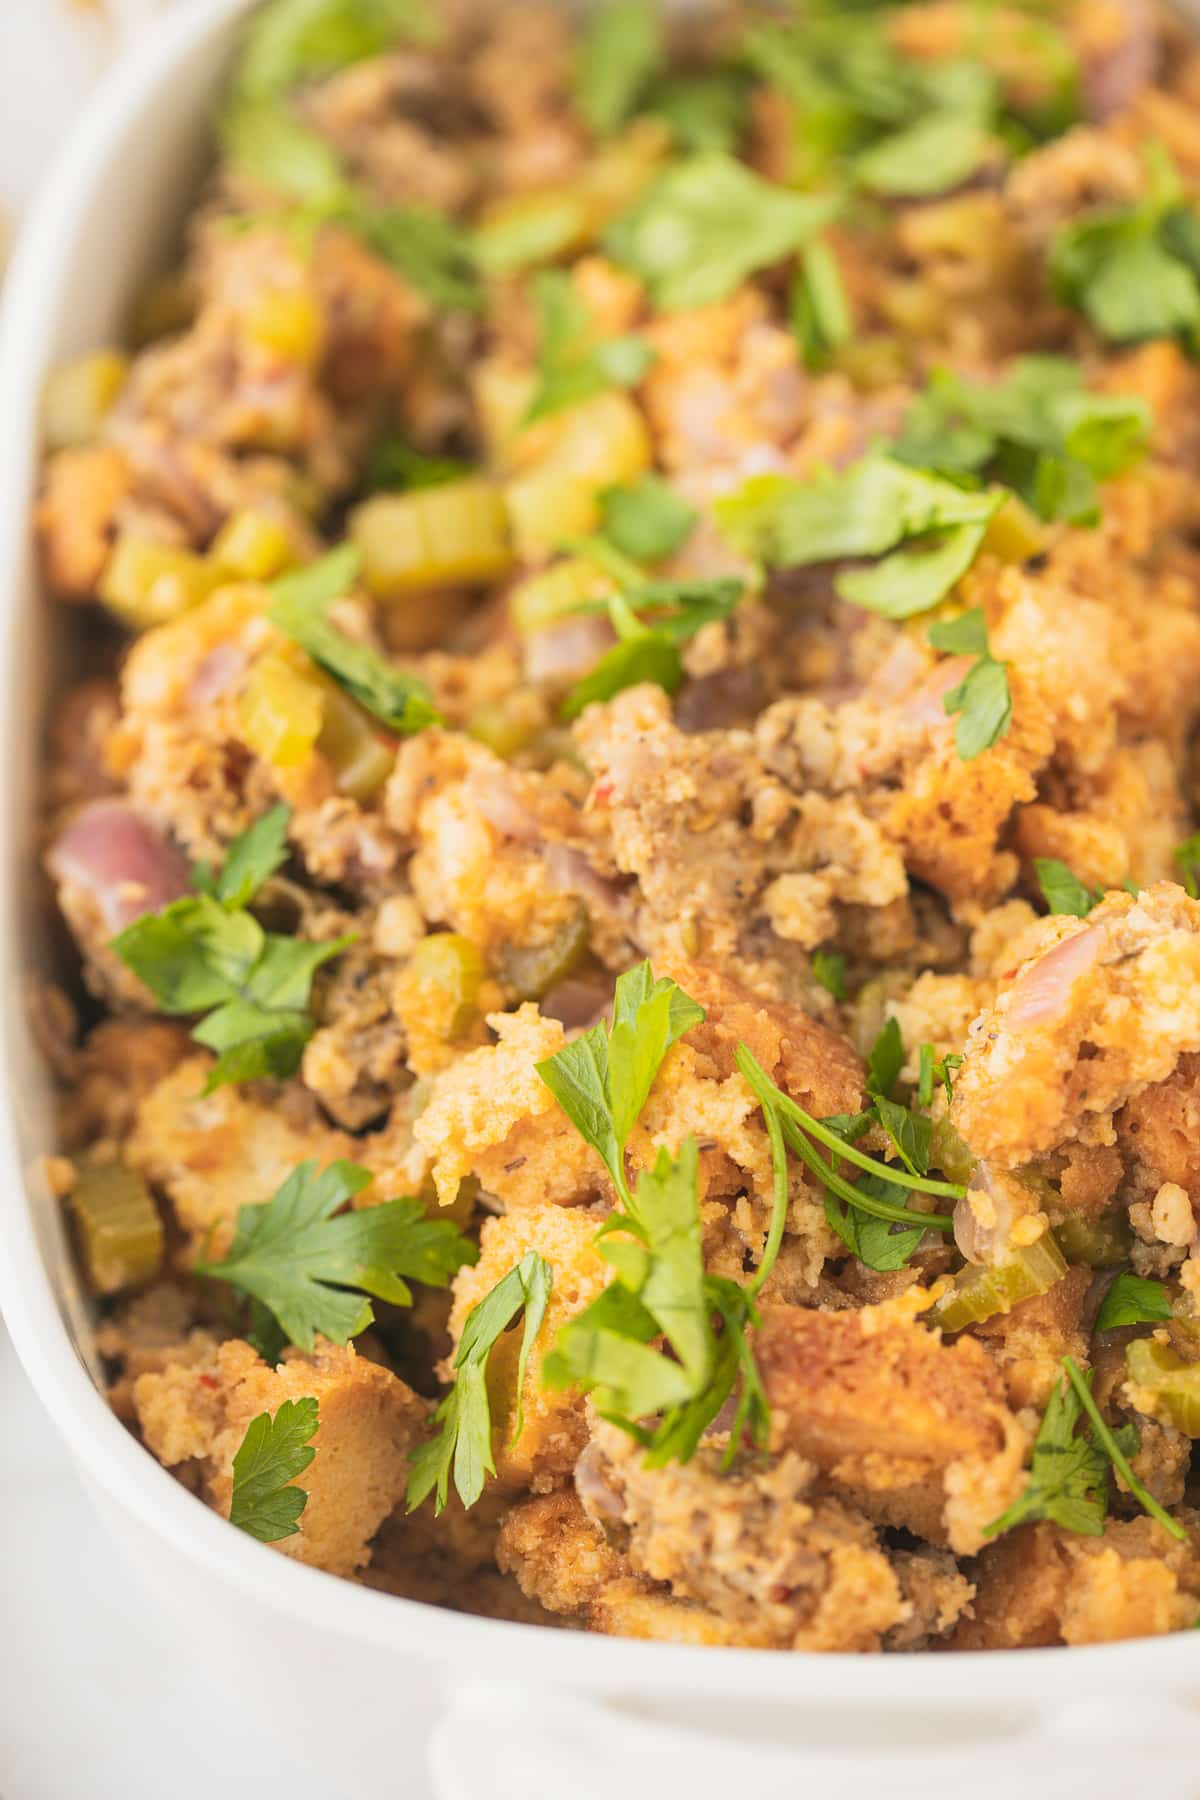 up close picture of instant pot cooked stuffing.